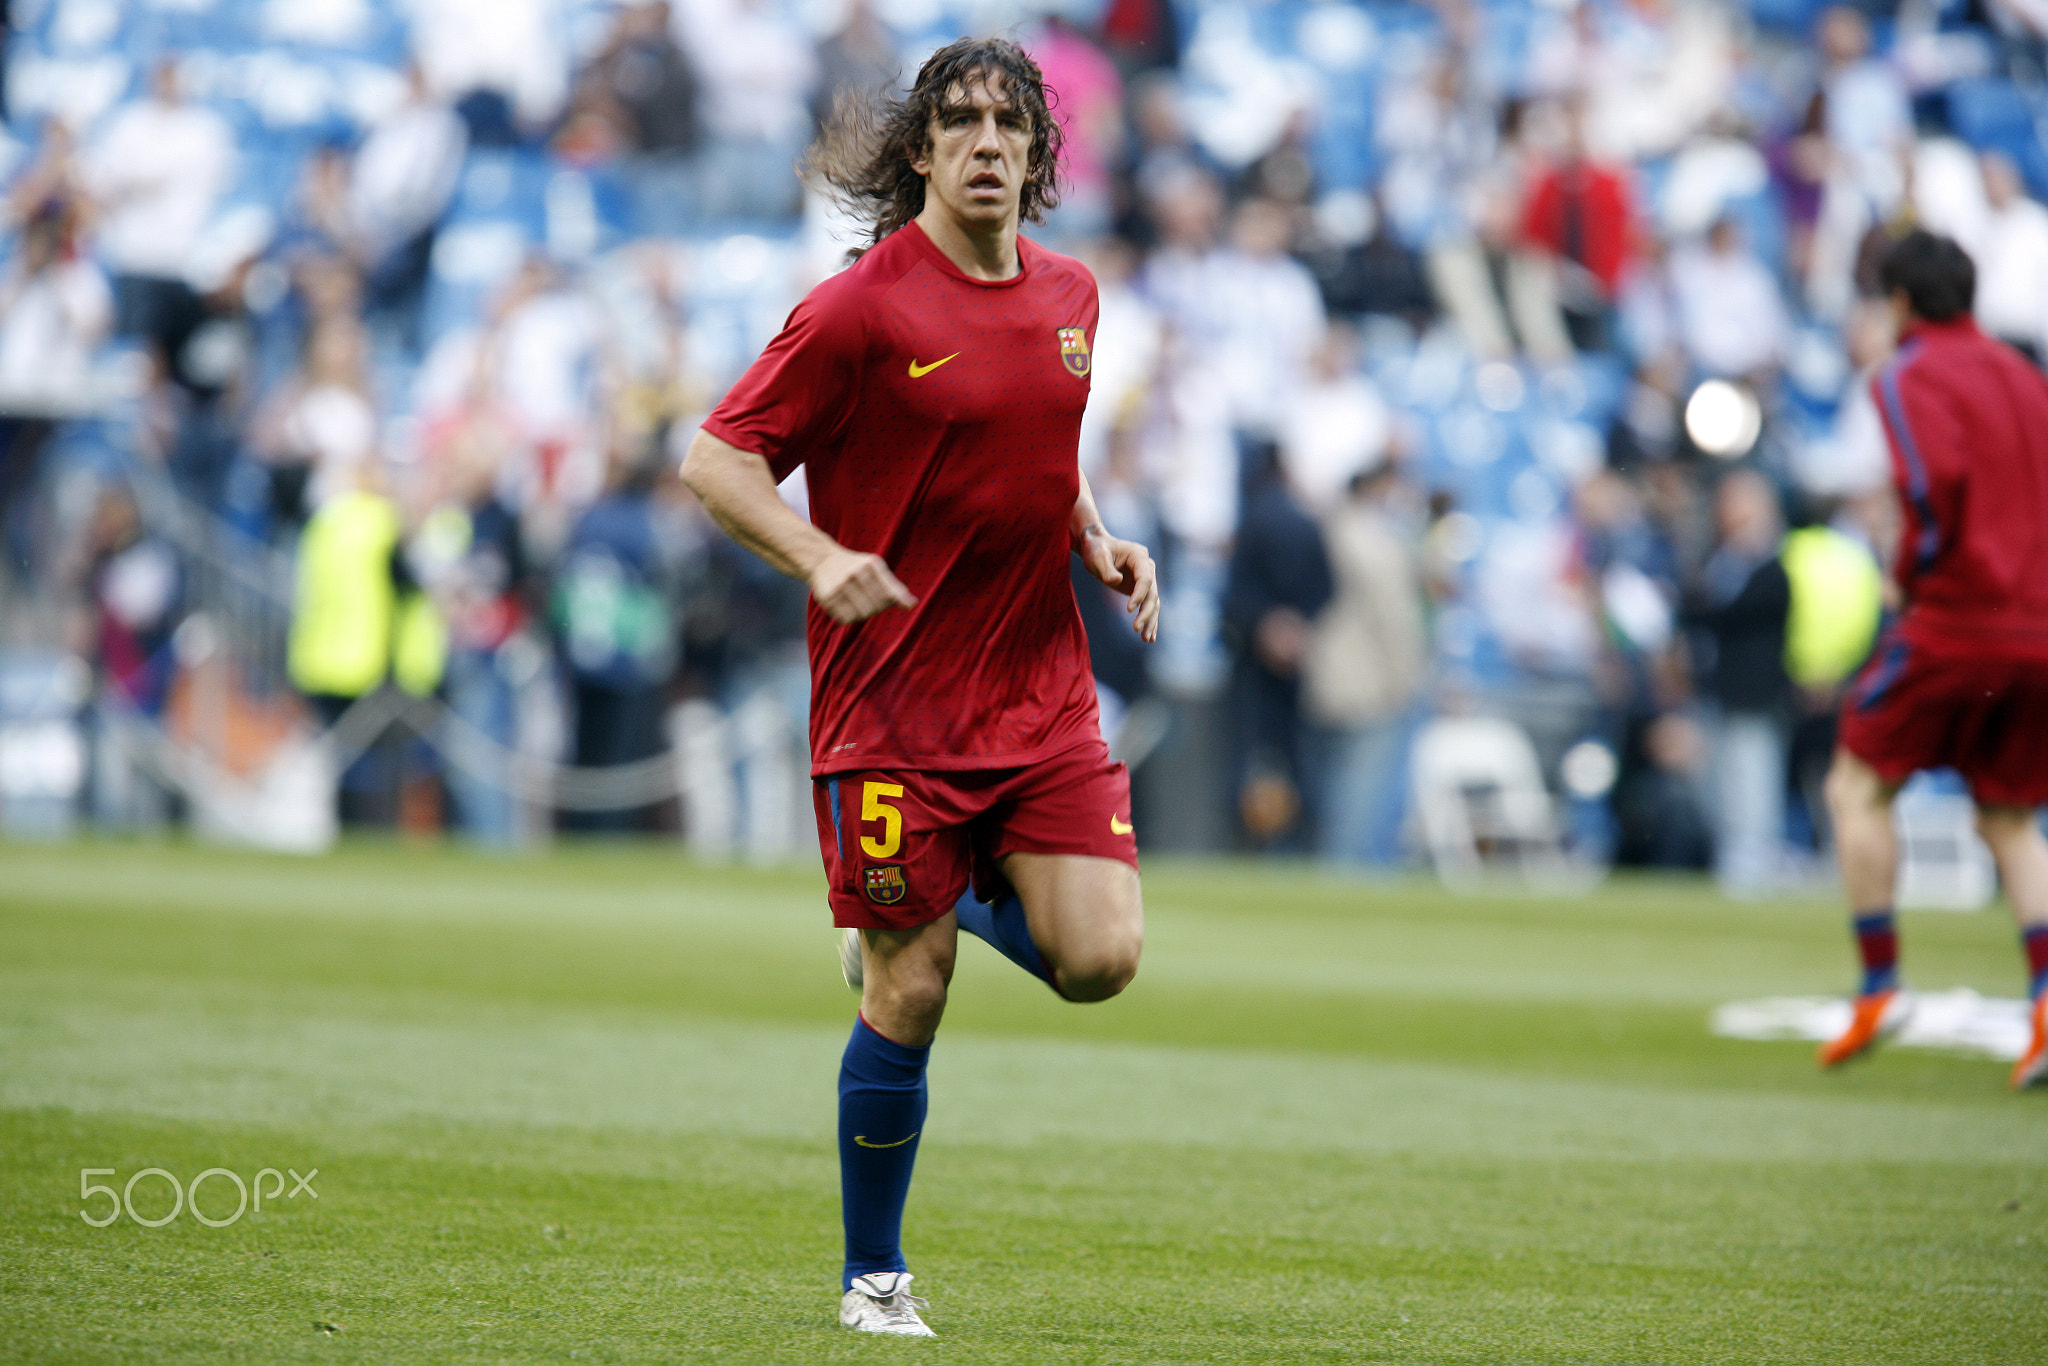 Puyol warming up before the UEFA Champions League Semifinals game between Real Madrid and FC Barcelo